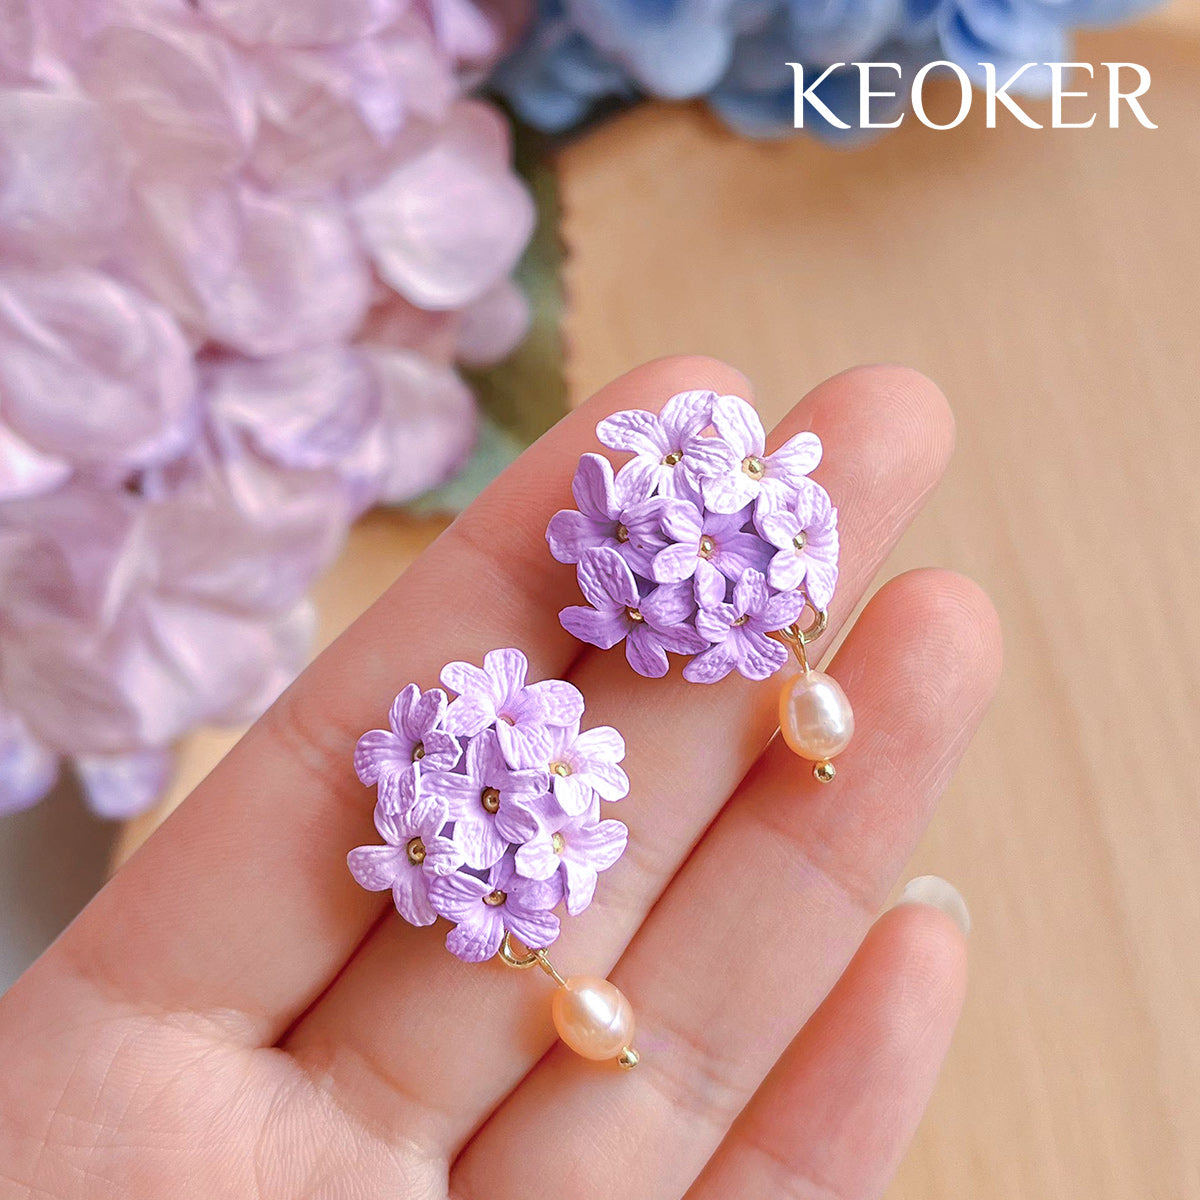 Keoker 15 Organic Shape Clay Cutters for Polymer Clay Jewelry, Polymer Clay  Cutters for Clay Earrings Jewerlry Making (All)